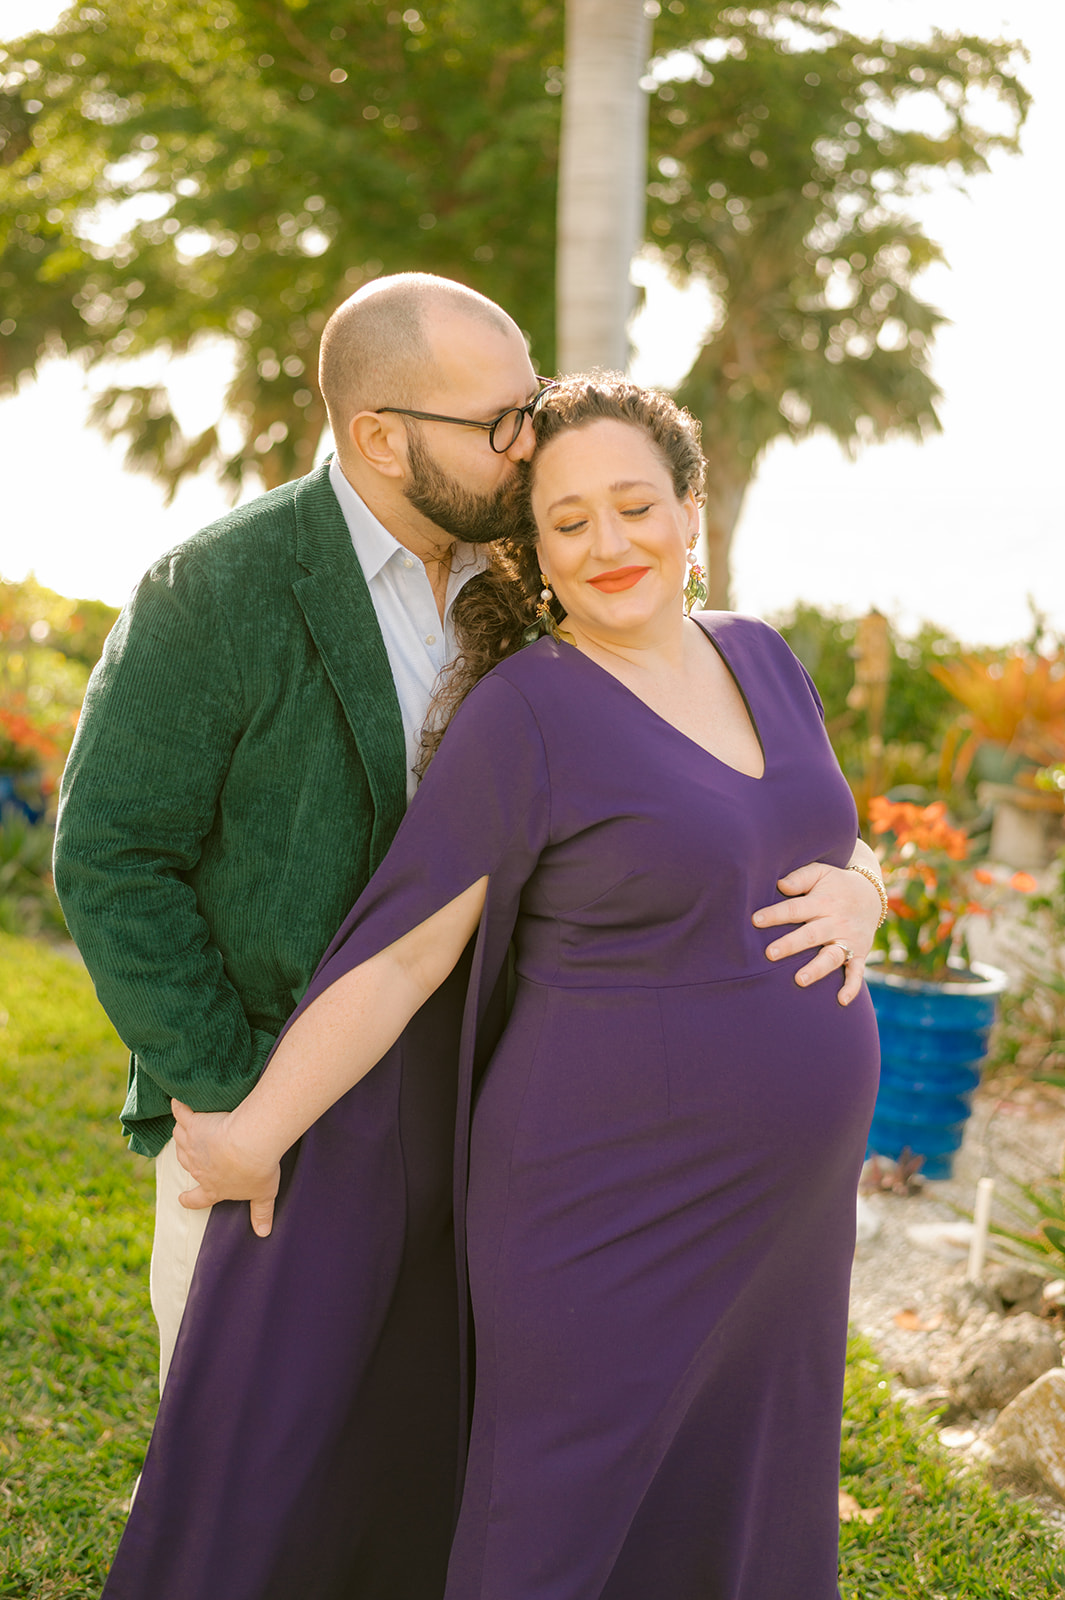 A Stunning Maternity Photo Session with Katie and Jay Martinez in Naples Florida